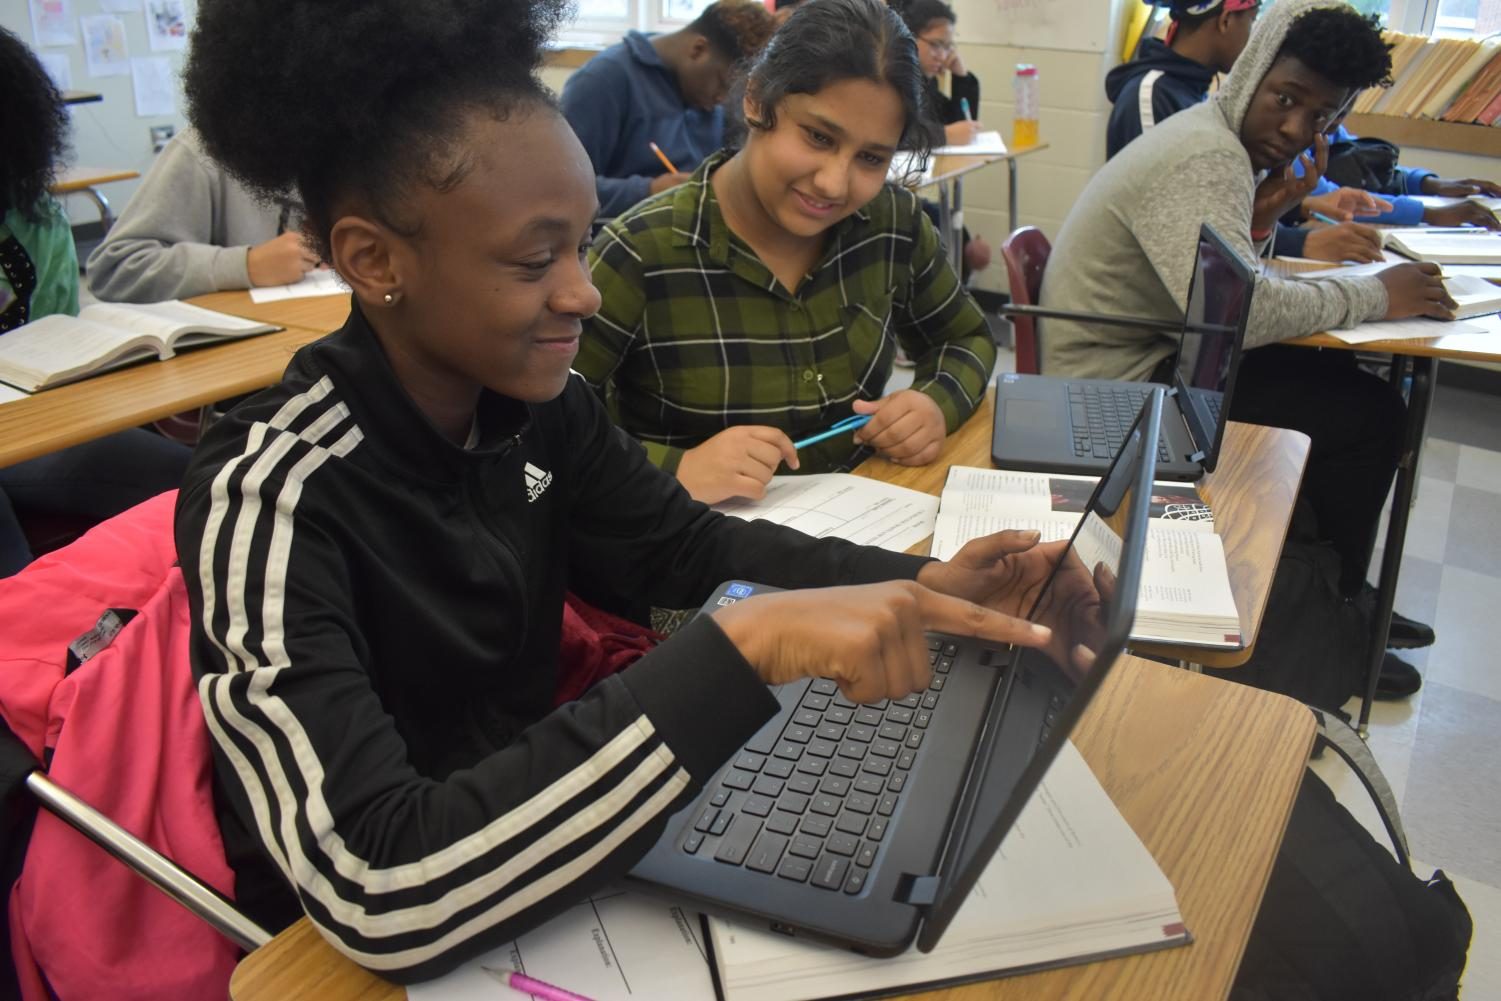 Students in Brooke Rameys 10th grade world literature class take advantage of the new touchscreen laptops purchased with donations by the Grady foundation to aid in learning the curriculum. The foundation plans to purchase nine more laptop carts soon. 